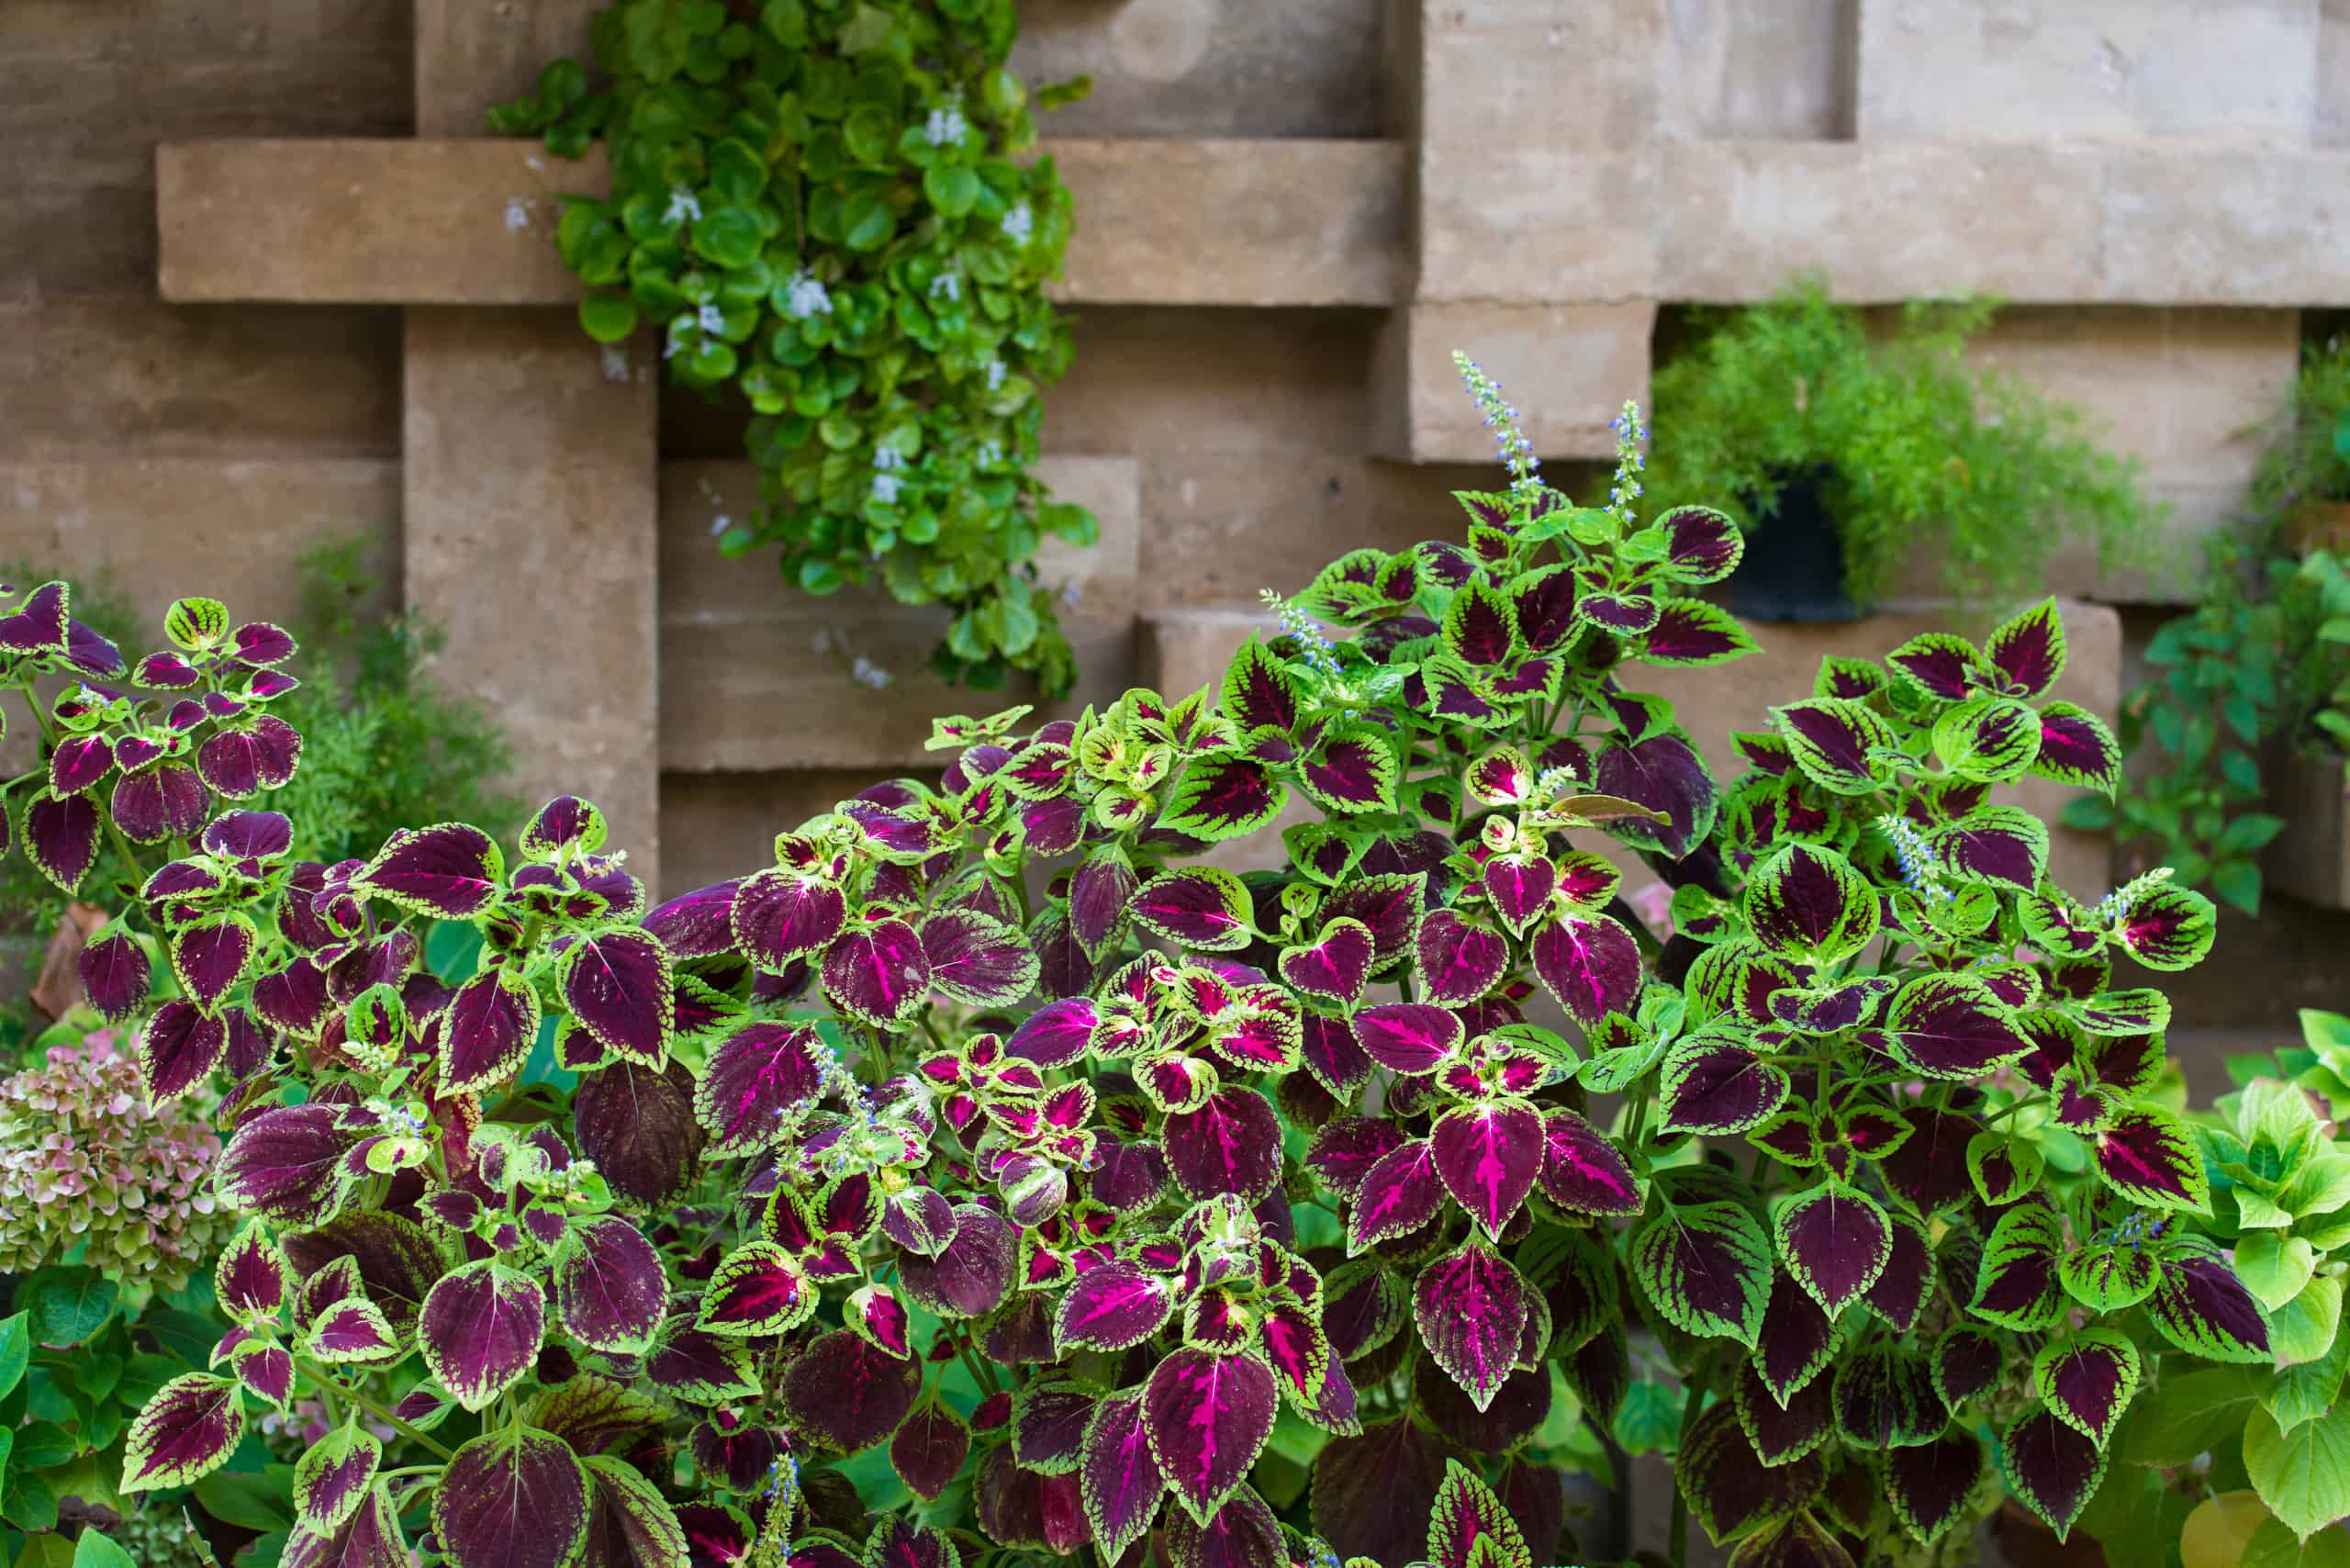 Coleusplant with green and purple leaves in front of a wood fence